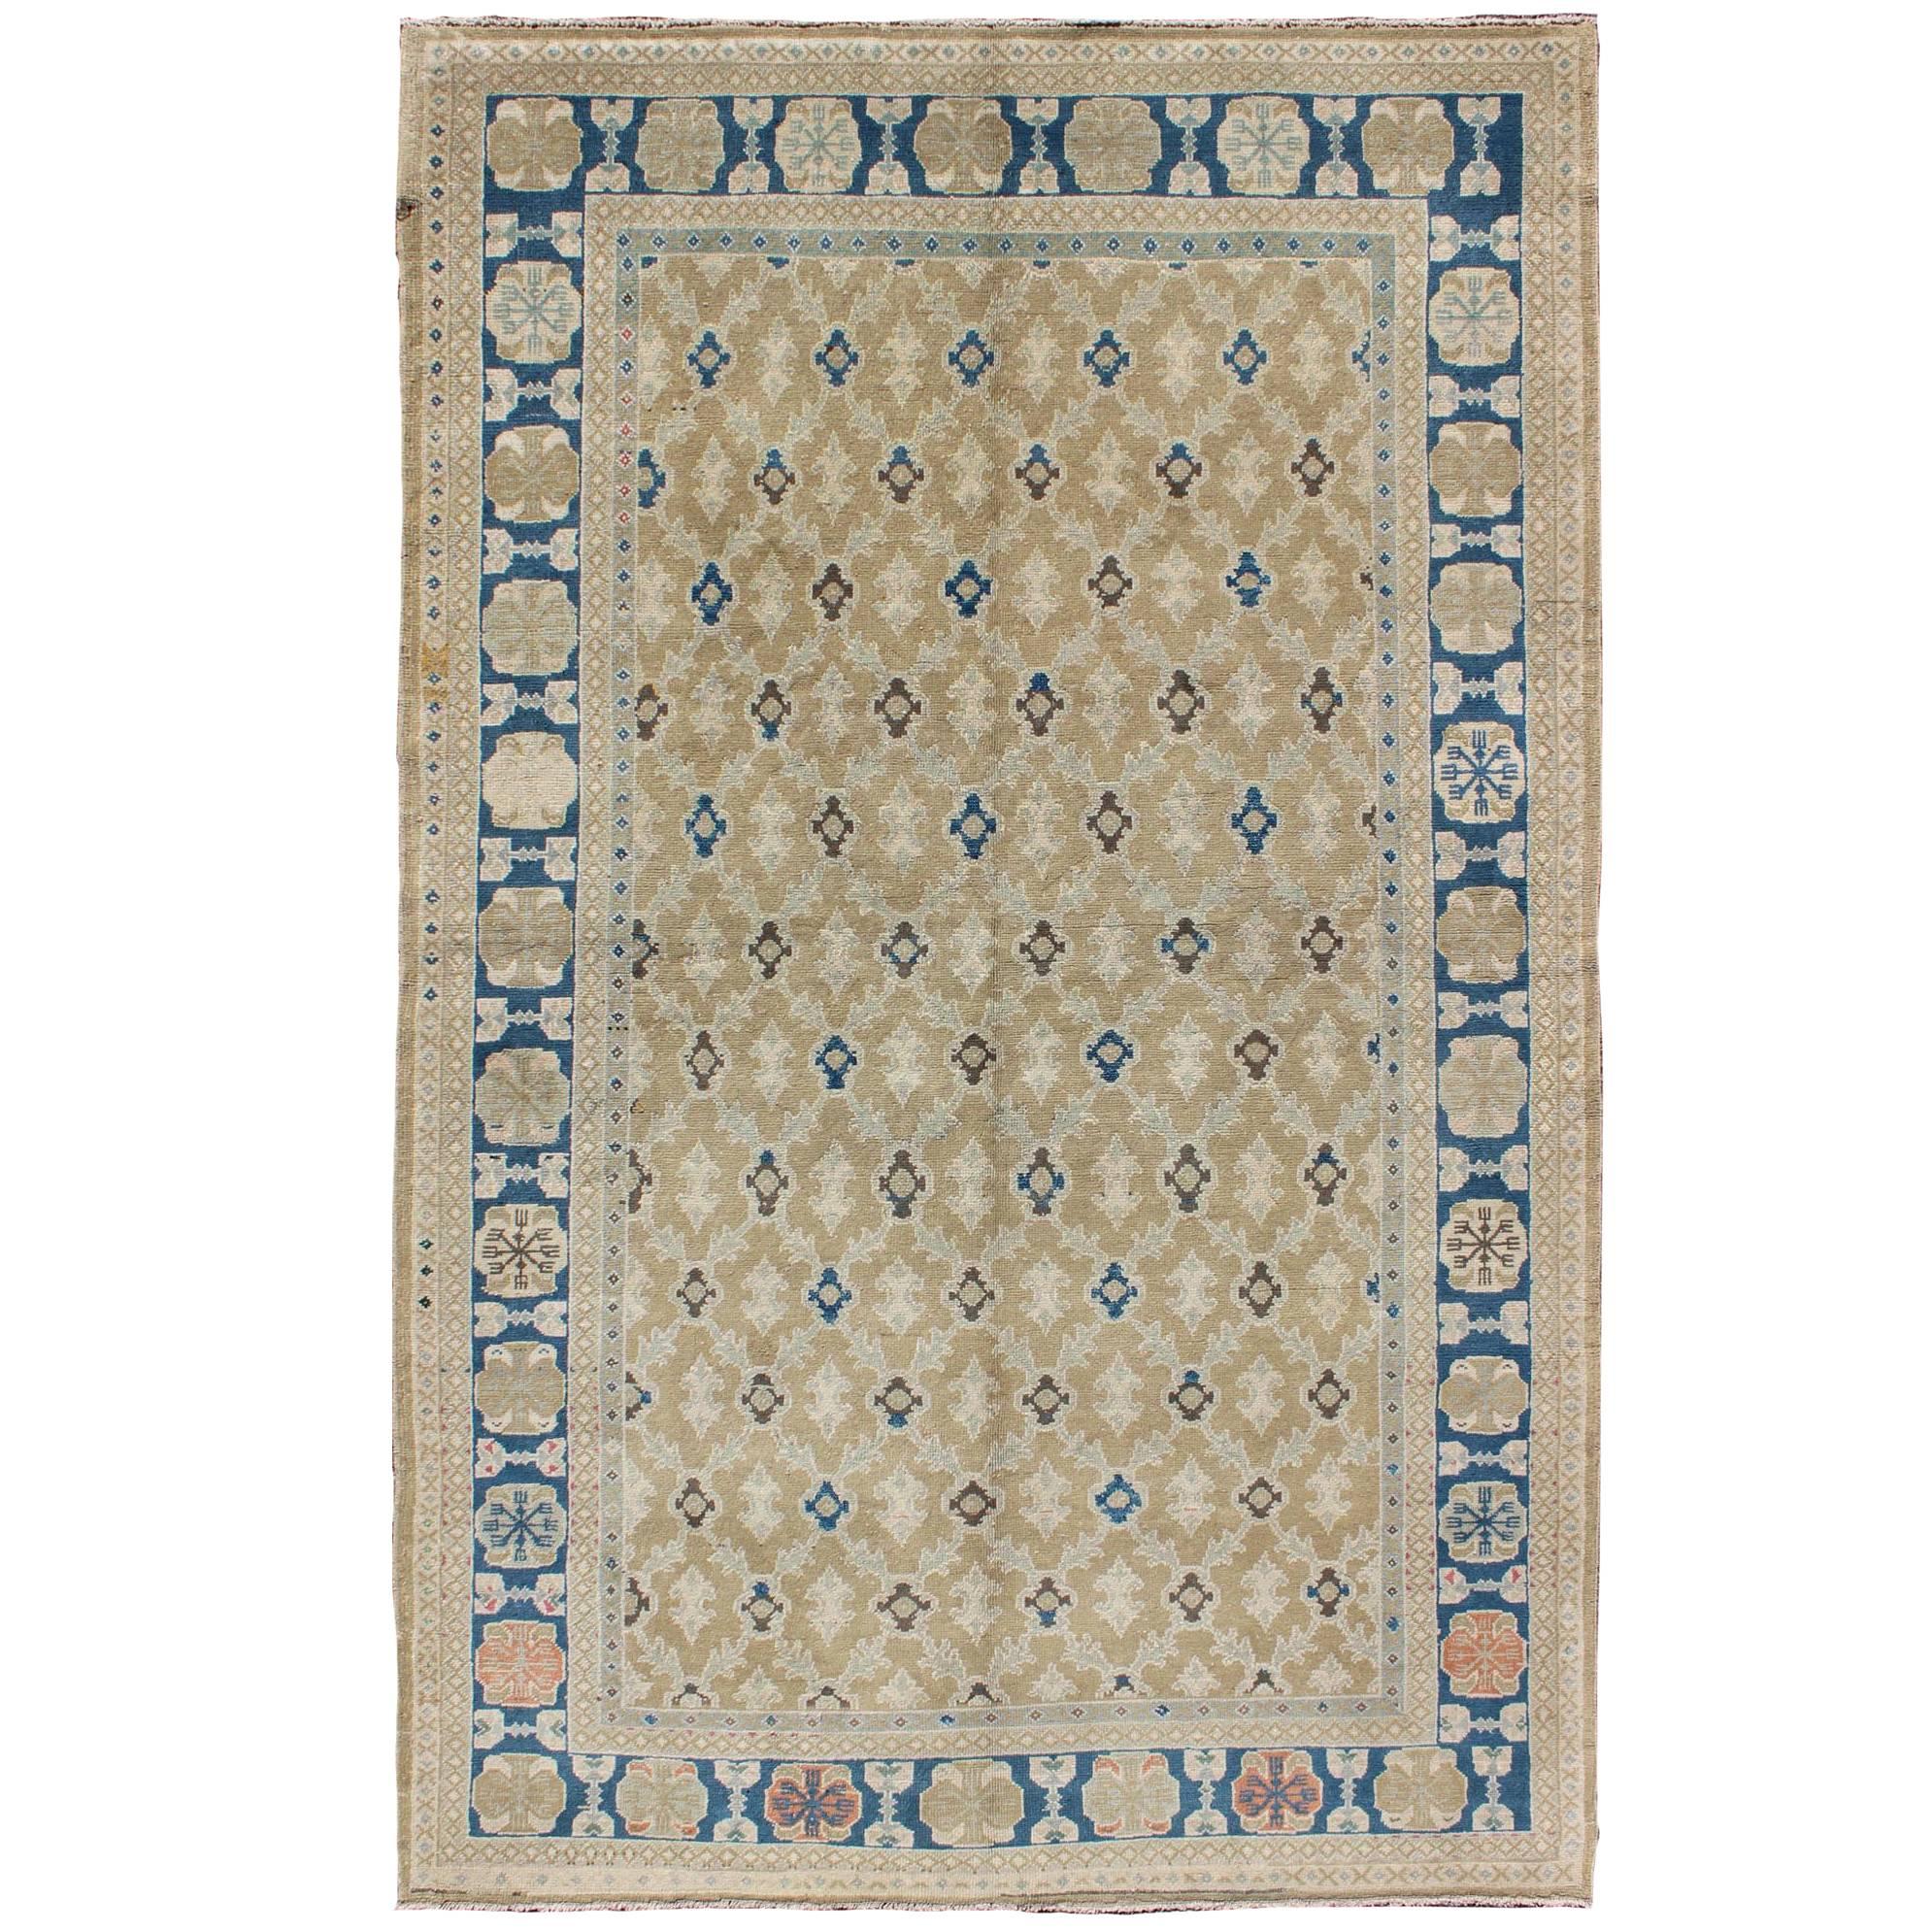 Fine Turkish Sivas Rug in All Over Geometric Design in Tan, Taupe, Blue & Brown For Sale